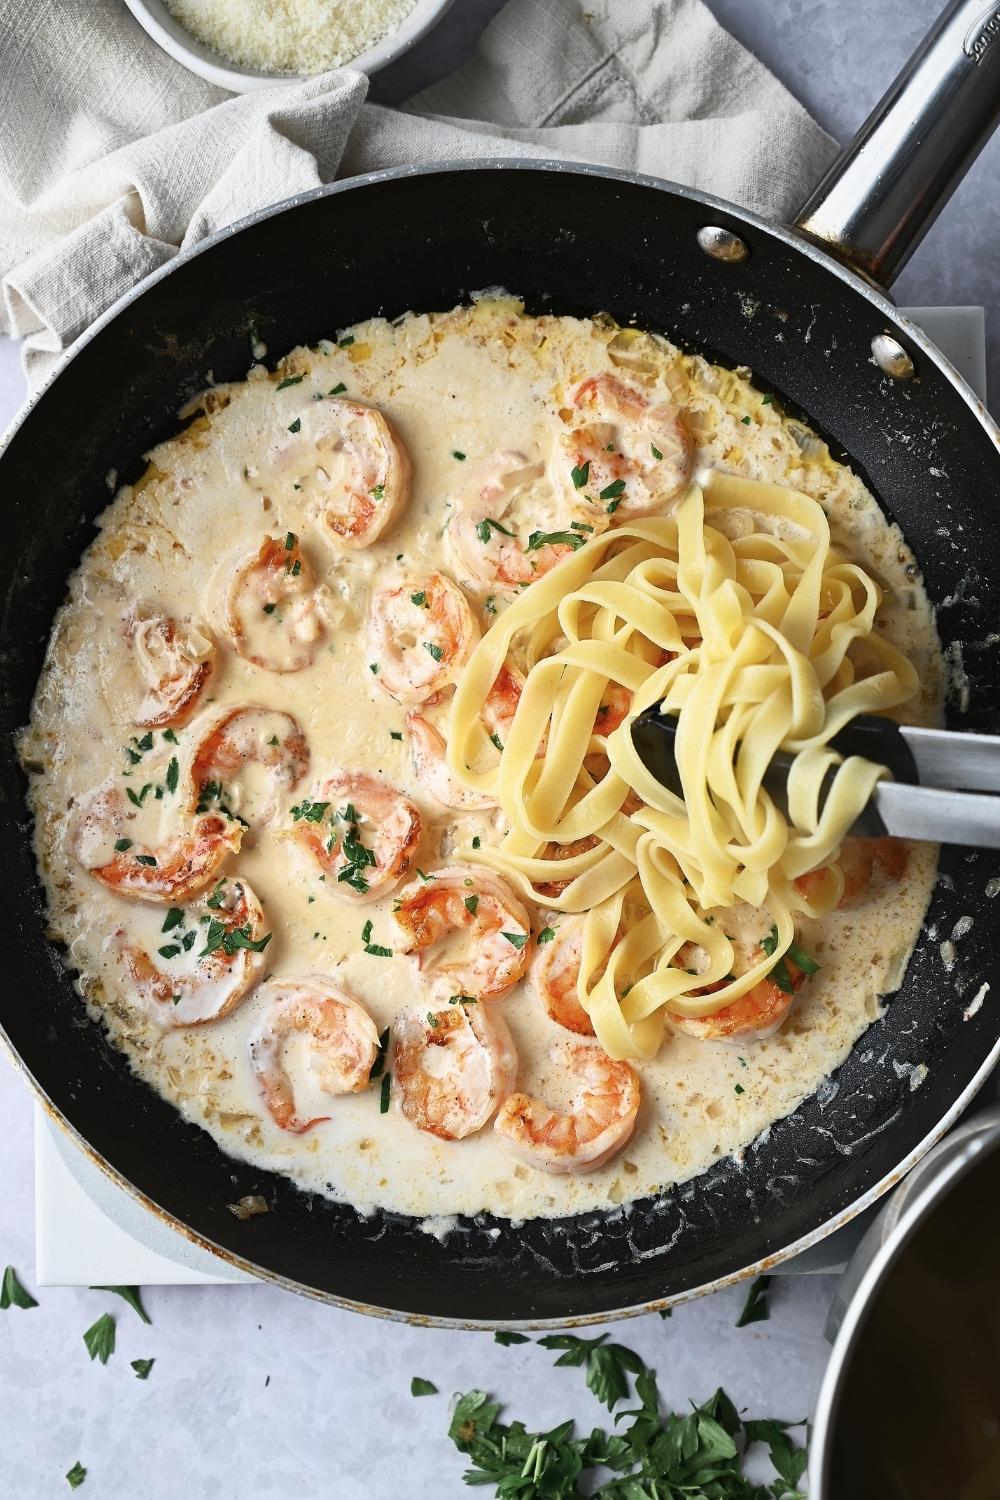 A pan with onion, garlic, and shrimp with garlic cream sauce reducing. Cooked Fettuccini noodles are being added.